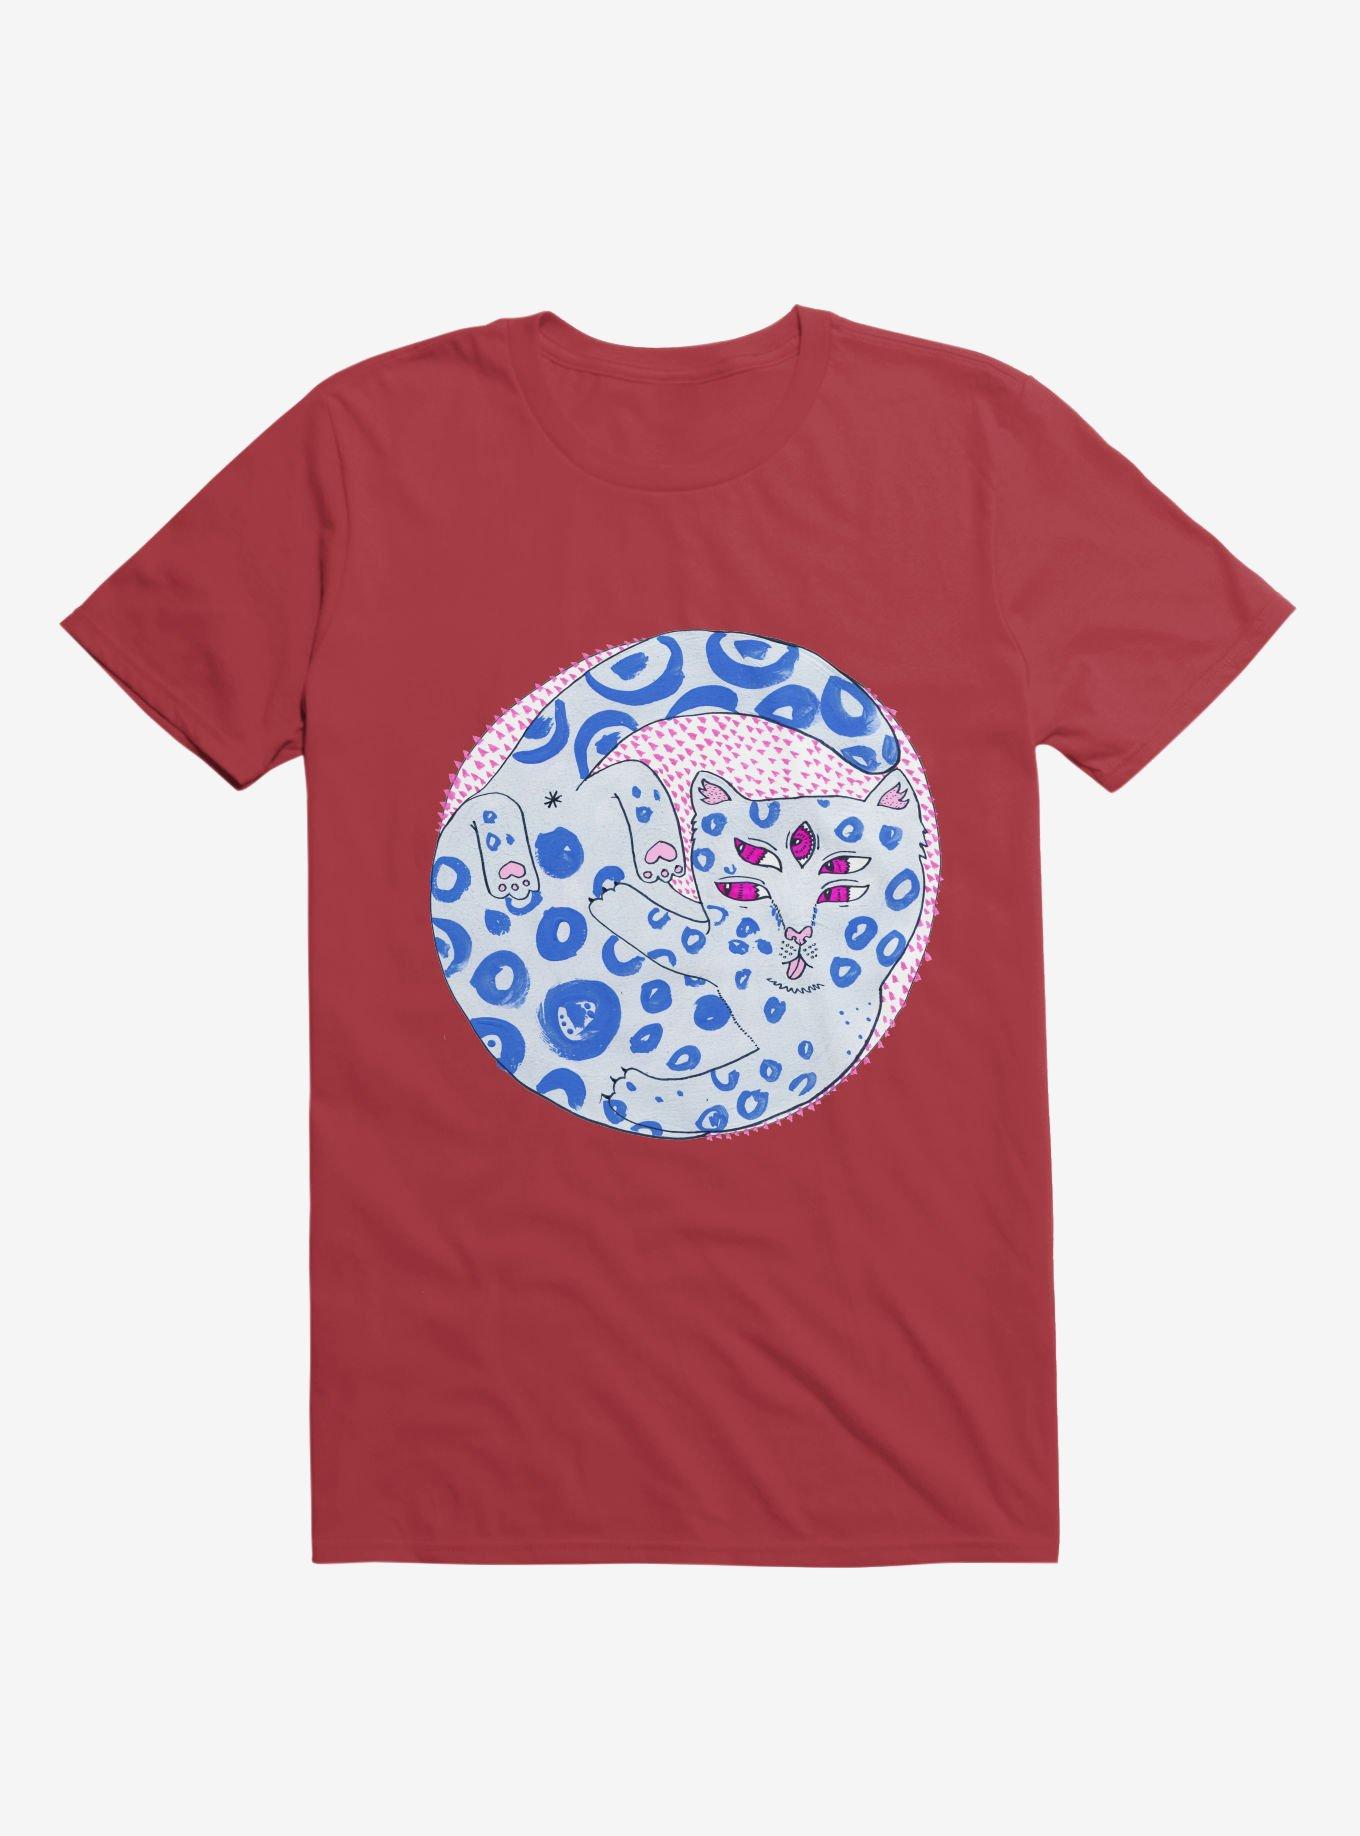 Blue Spotted Cat Bath Red T-Shirt, RED, hi-res